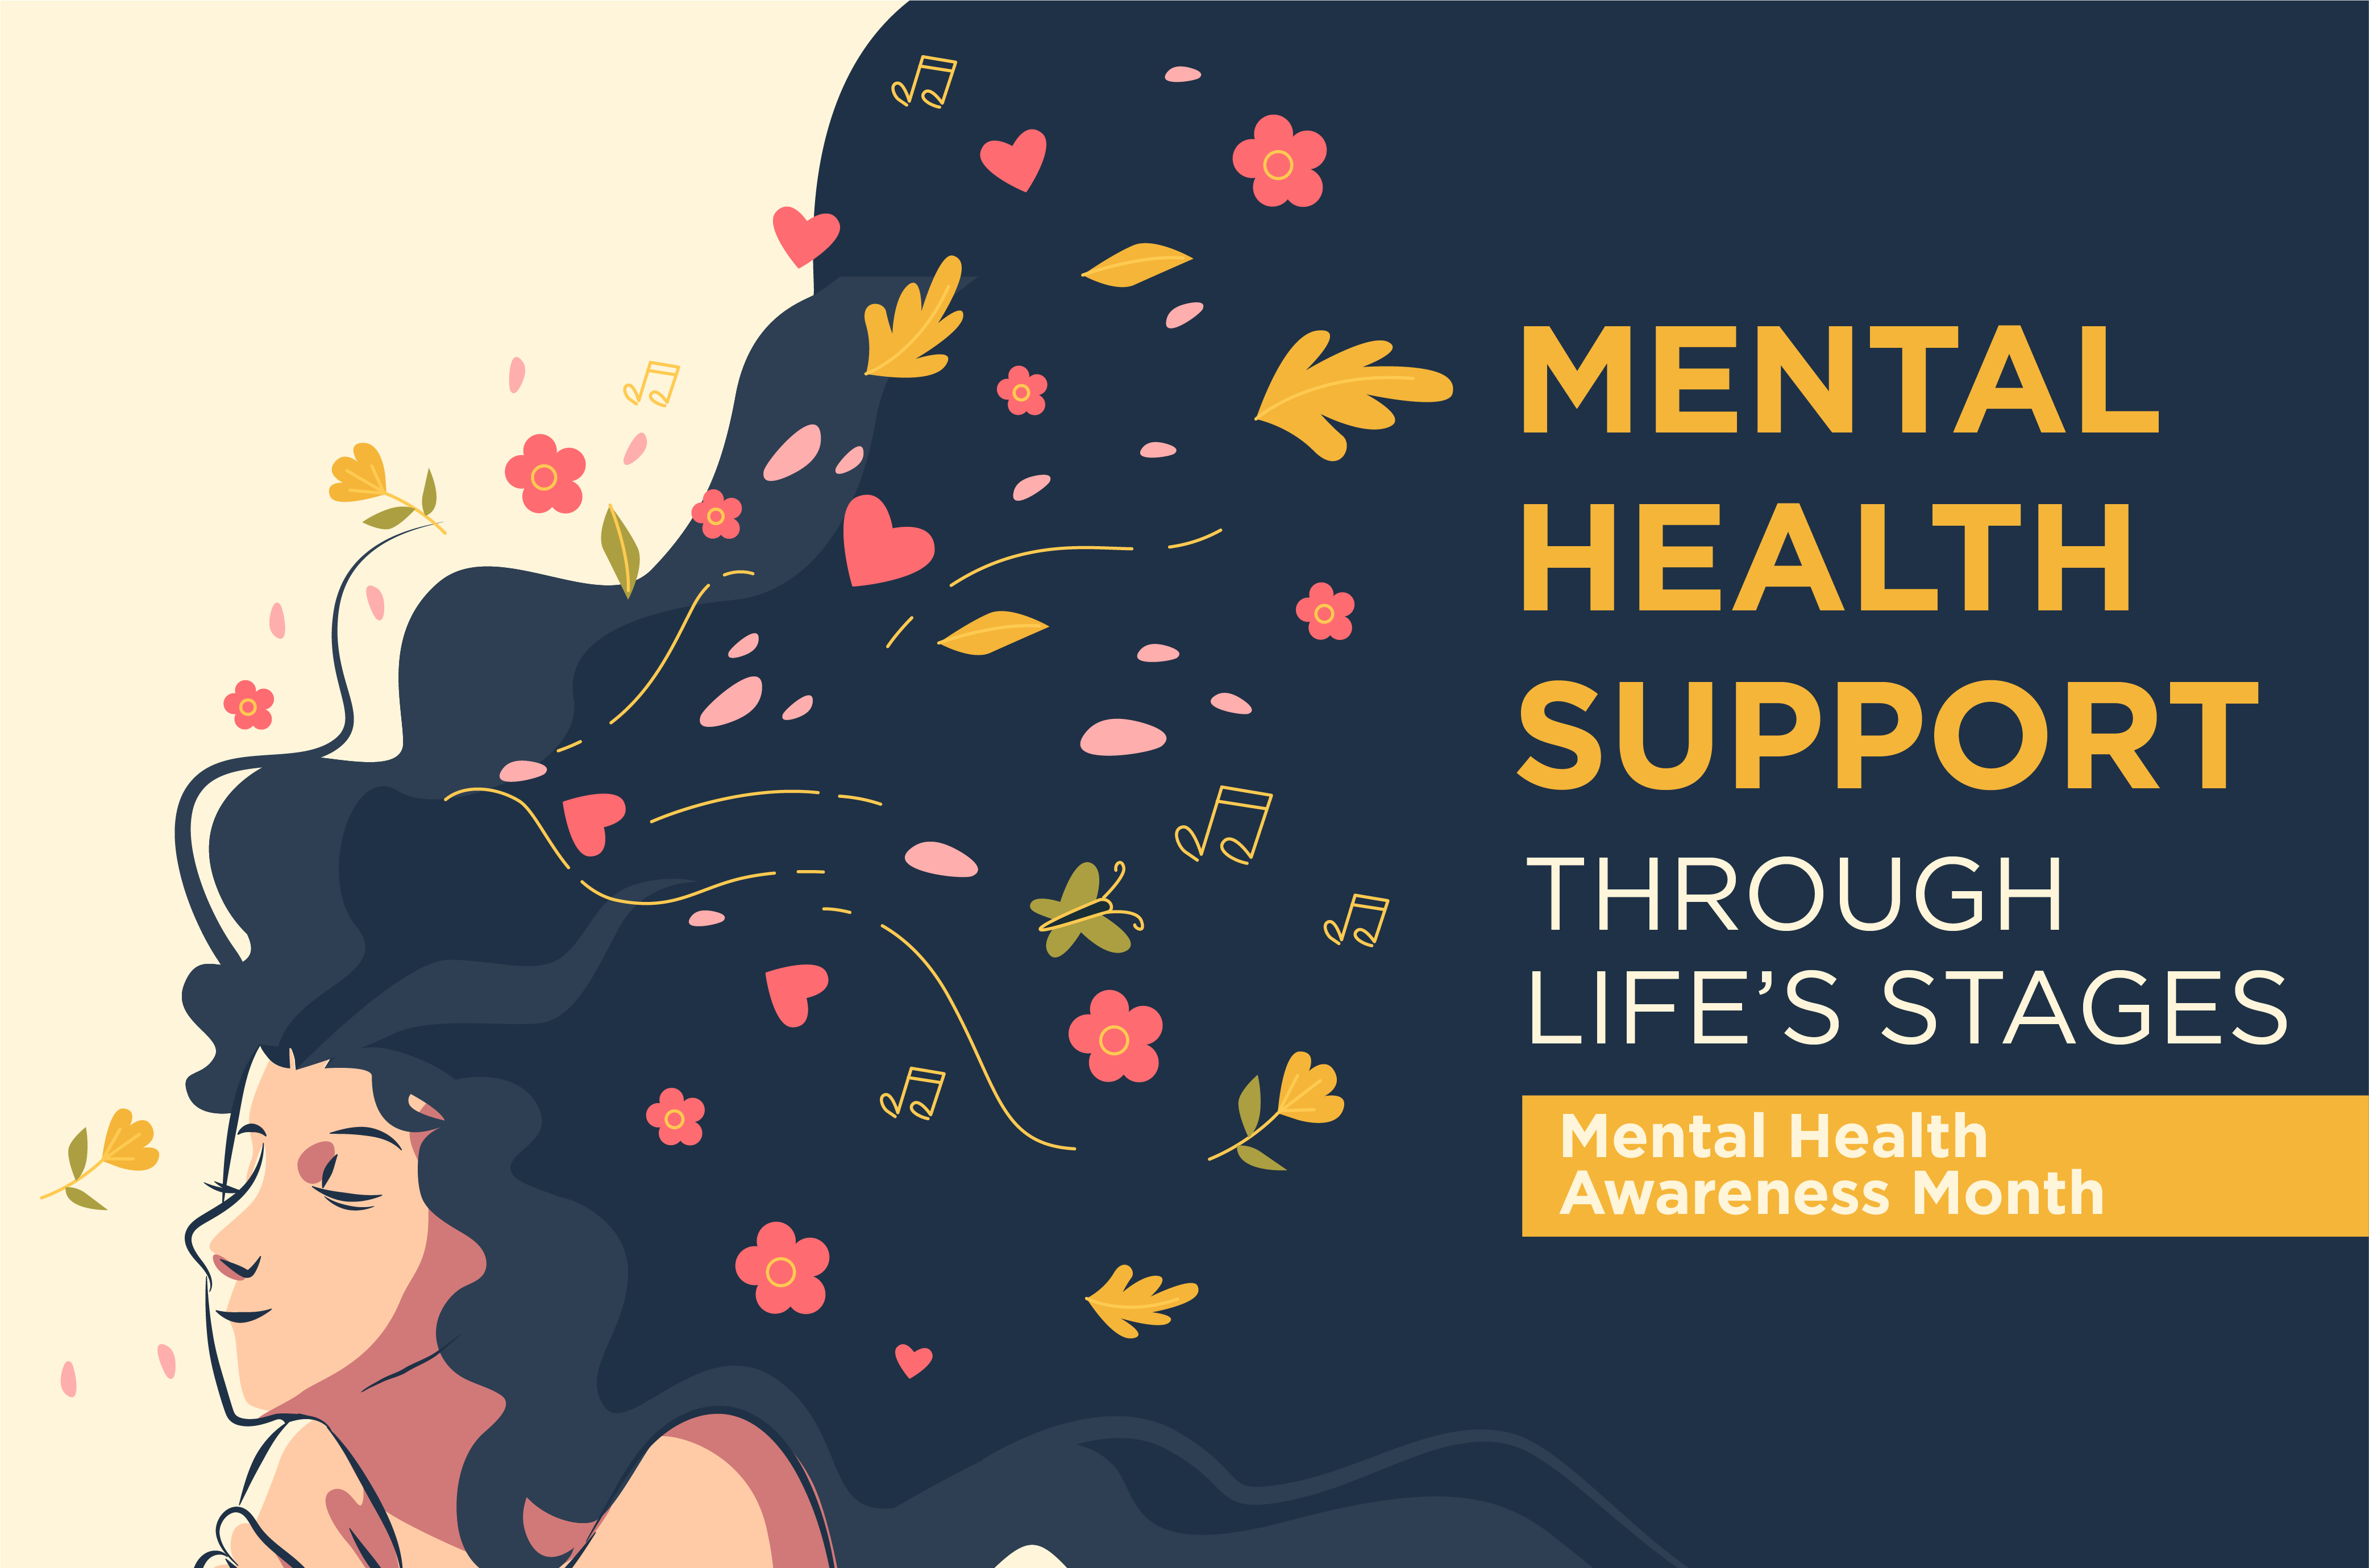 Mental Health Support through Life's Stages